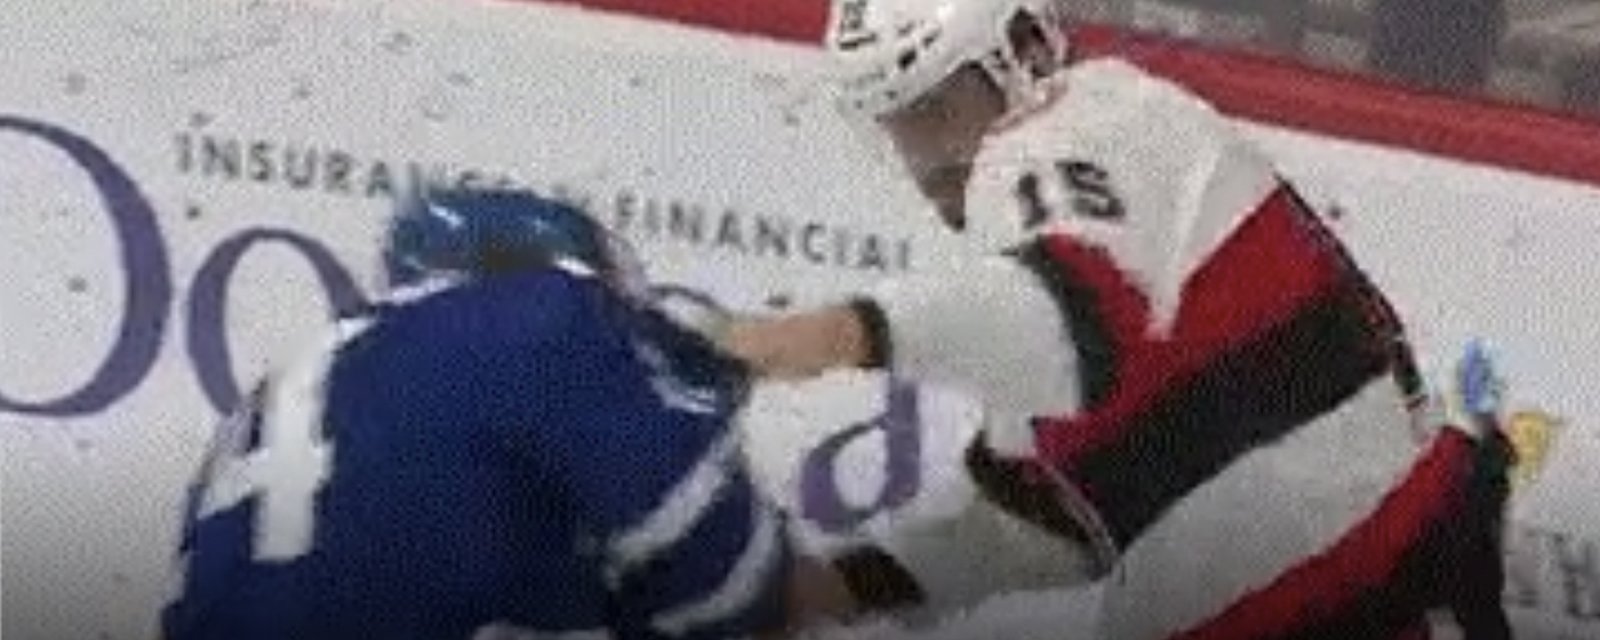 Must see: Kapanen gets into ill-advised fight!